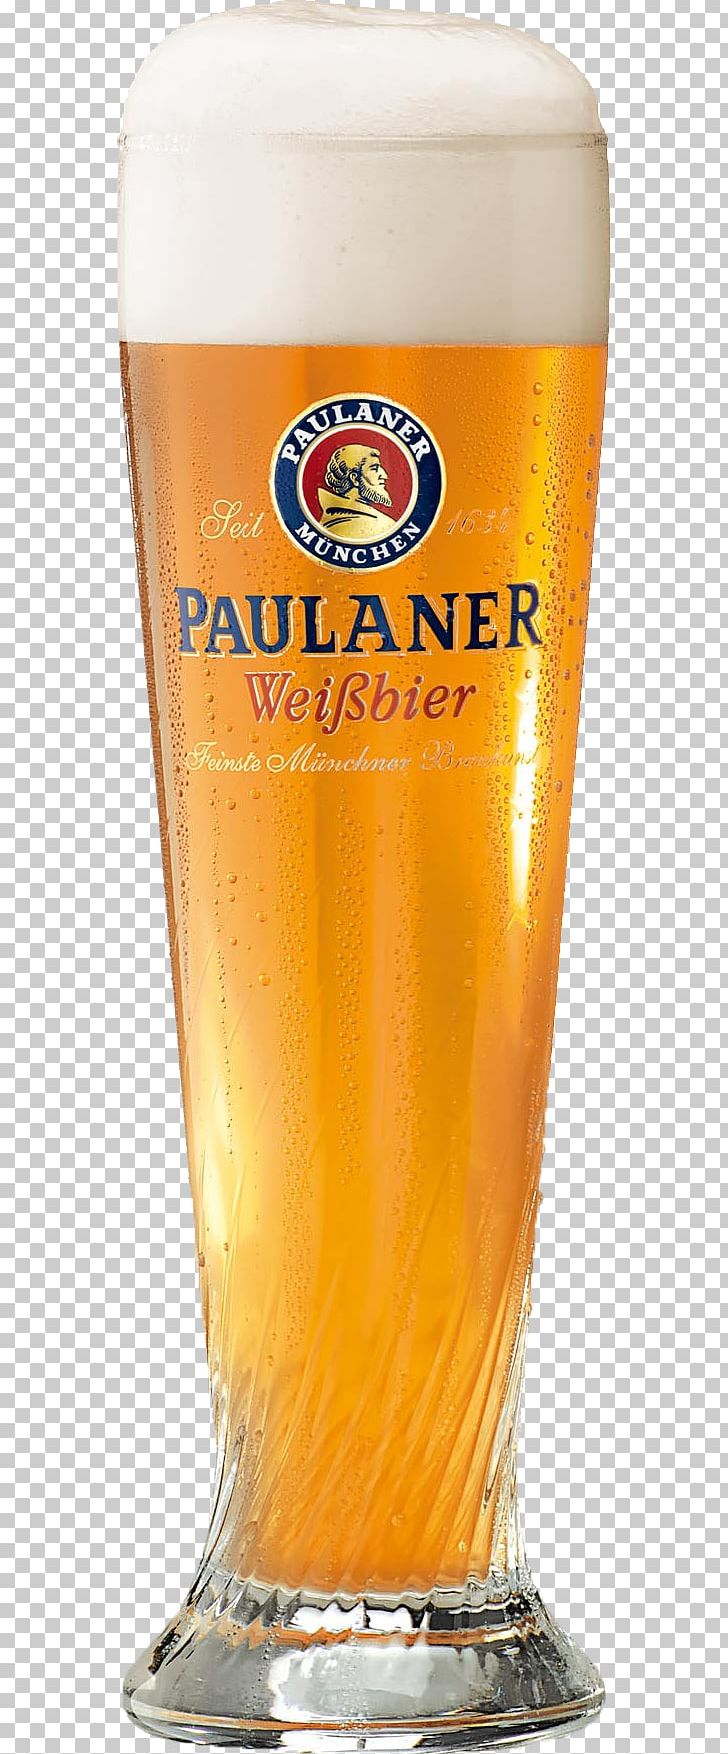 Paulaner Brewery Wheat Beer Paulaner Hefeweizen India Pale Ale PNG, Clipart, Alcoholic Beverage, Beer, Beer Bottle, Beer Cocktail, Beer Glass Free PNG Download